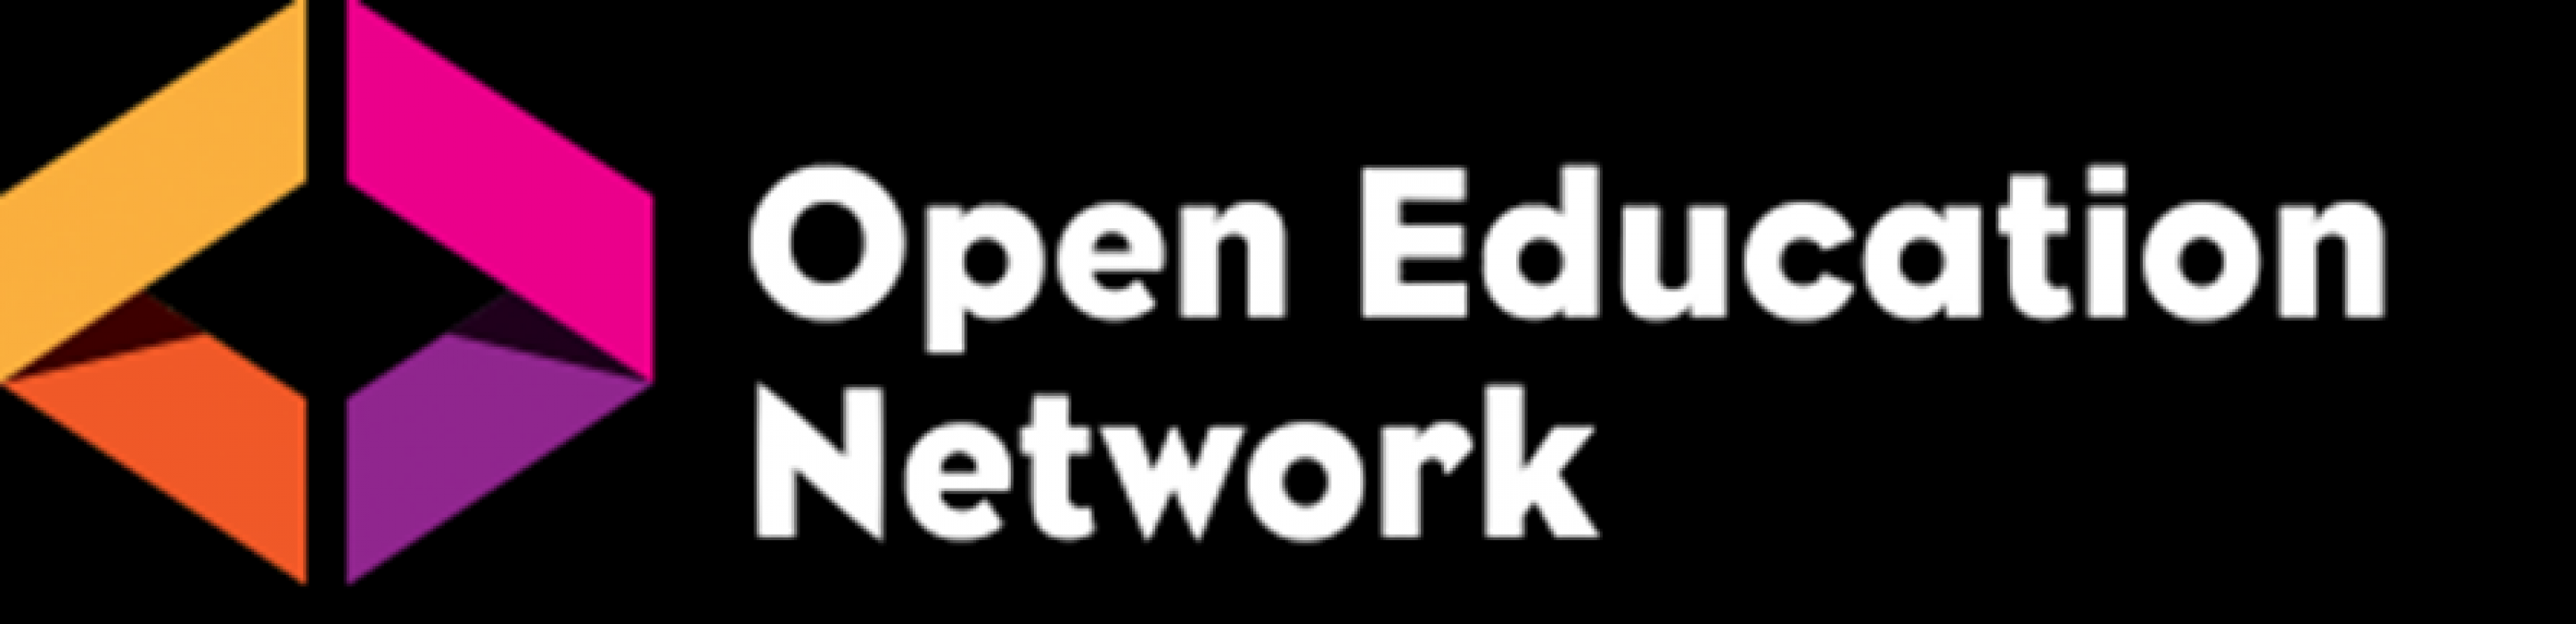 Open Education Network.png